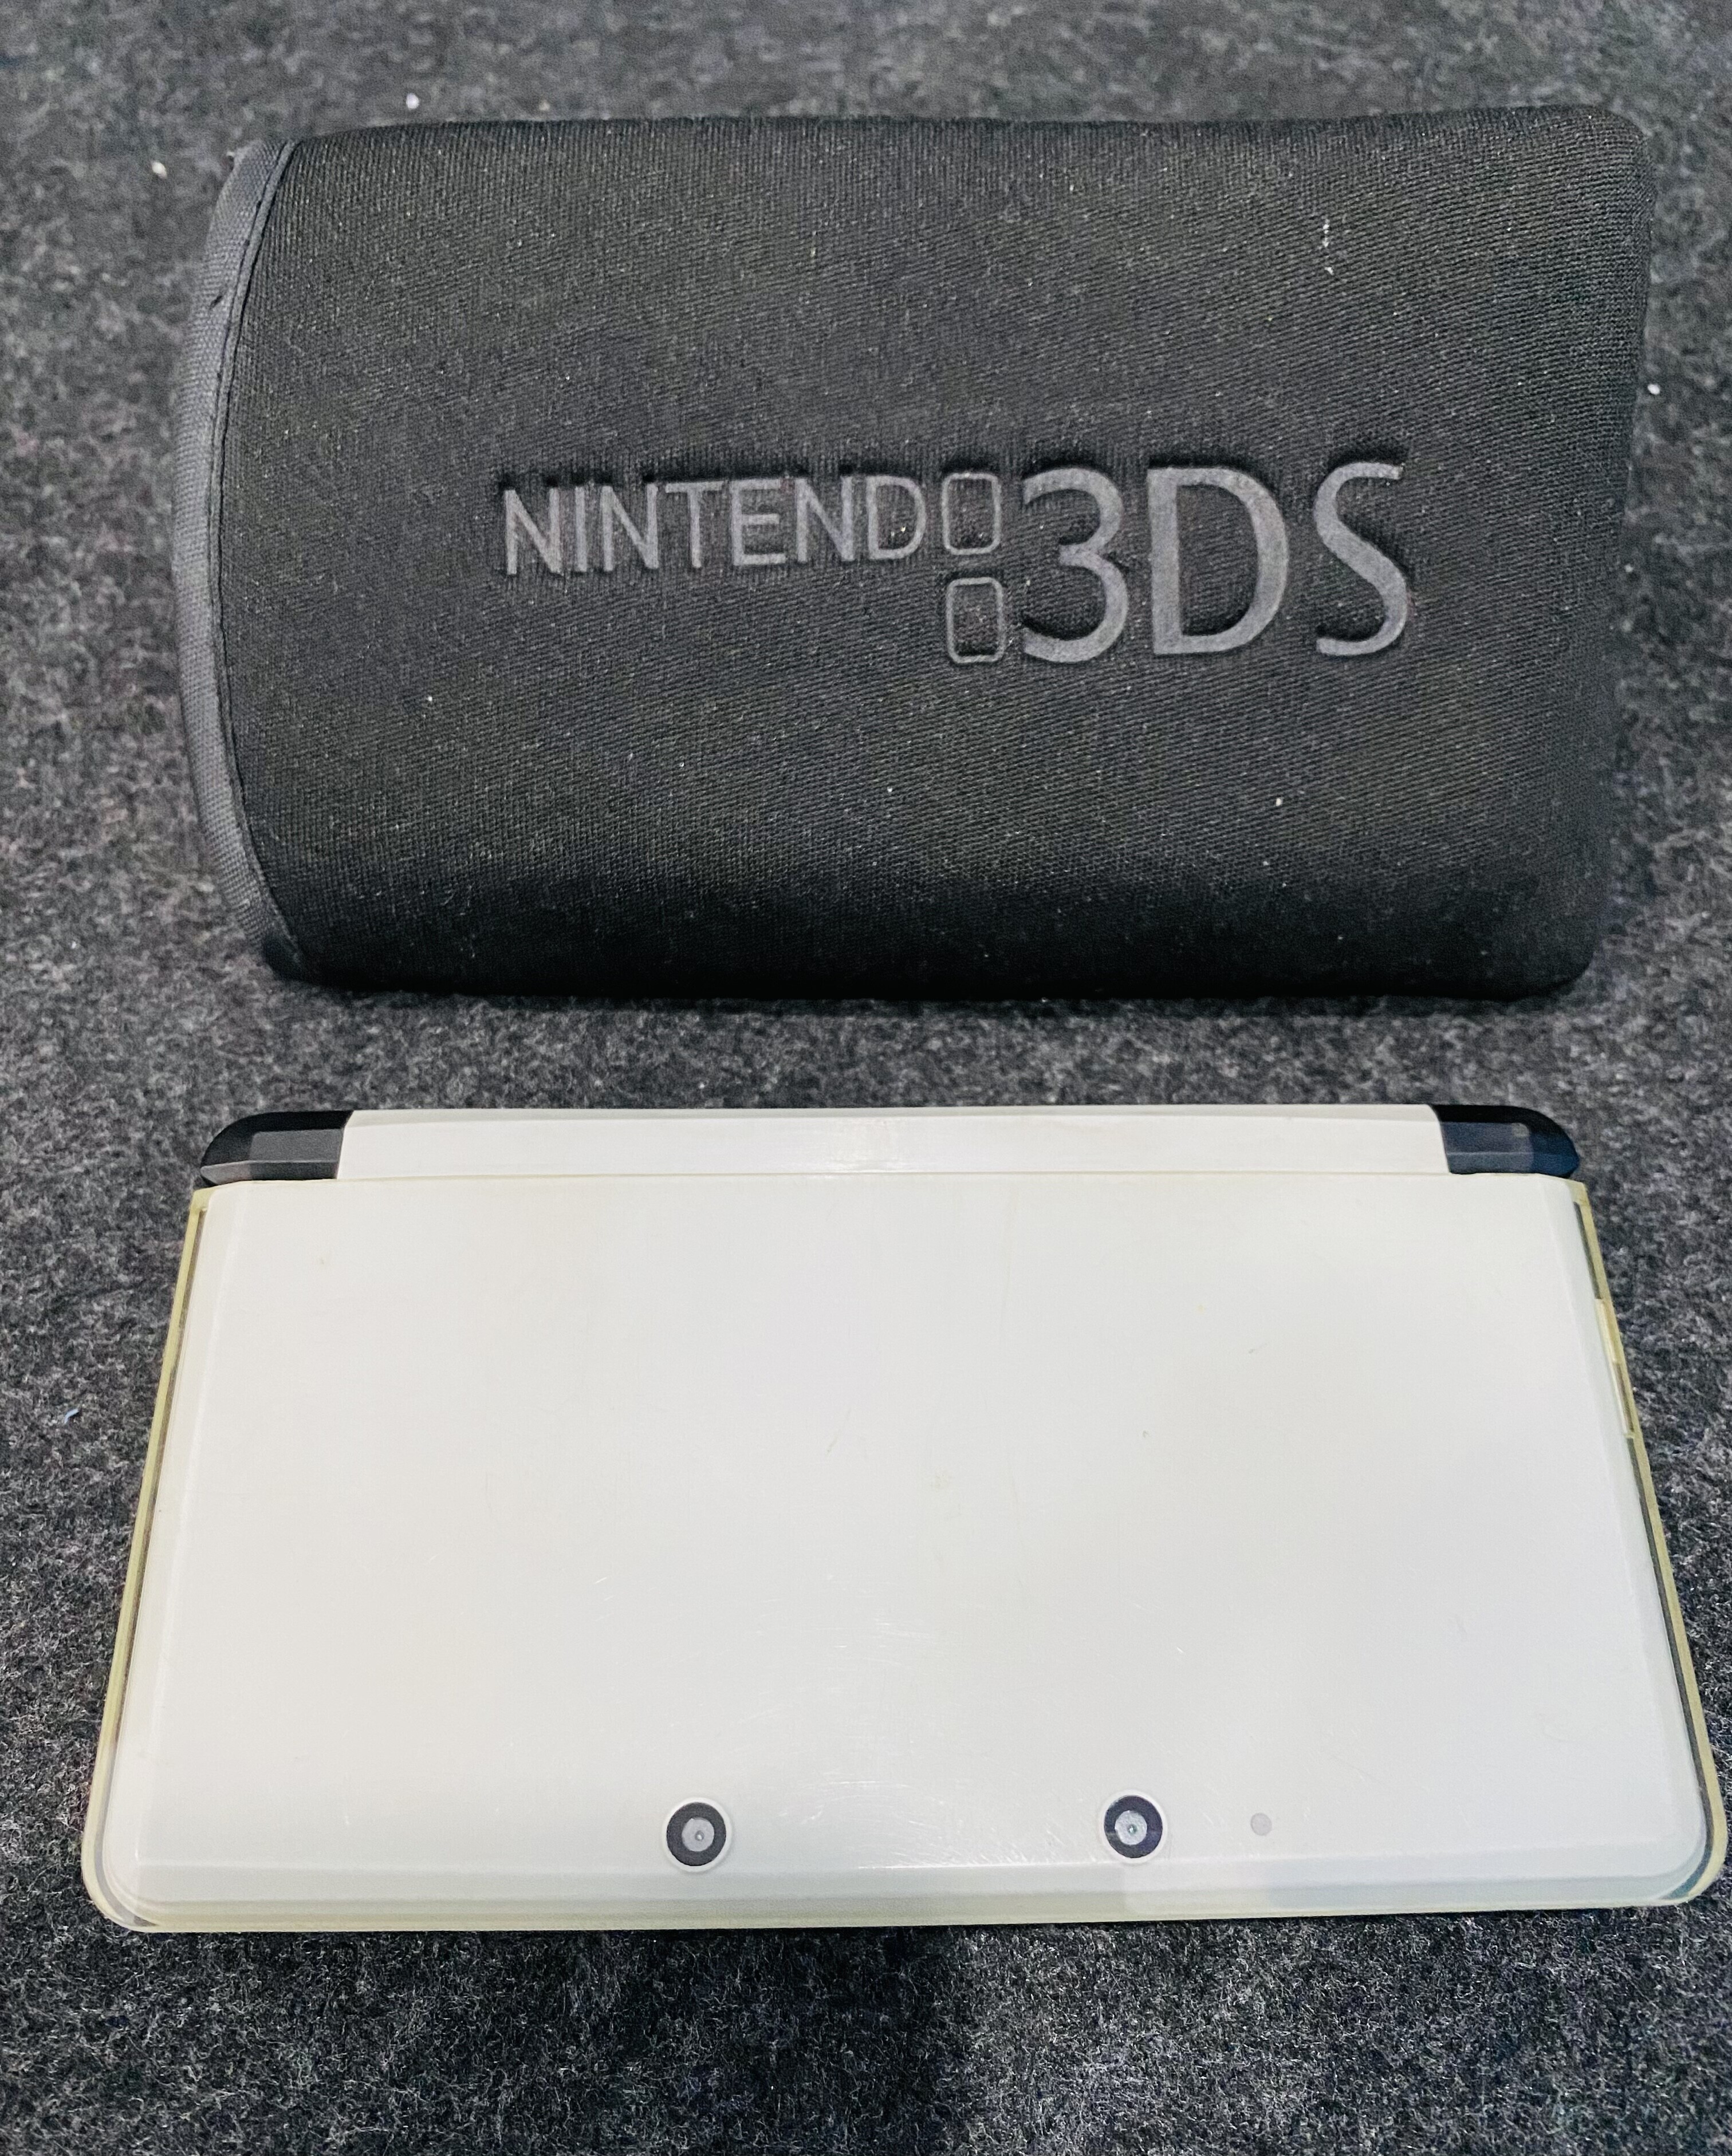  Nintendo 3DS Early Develoment Unit